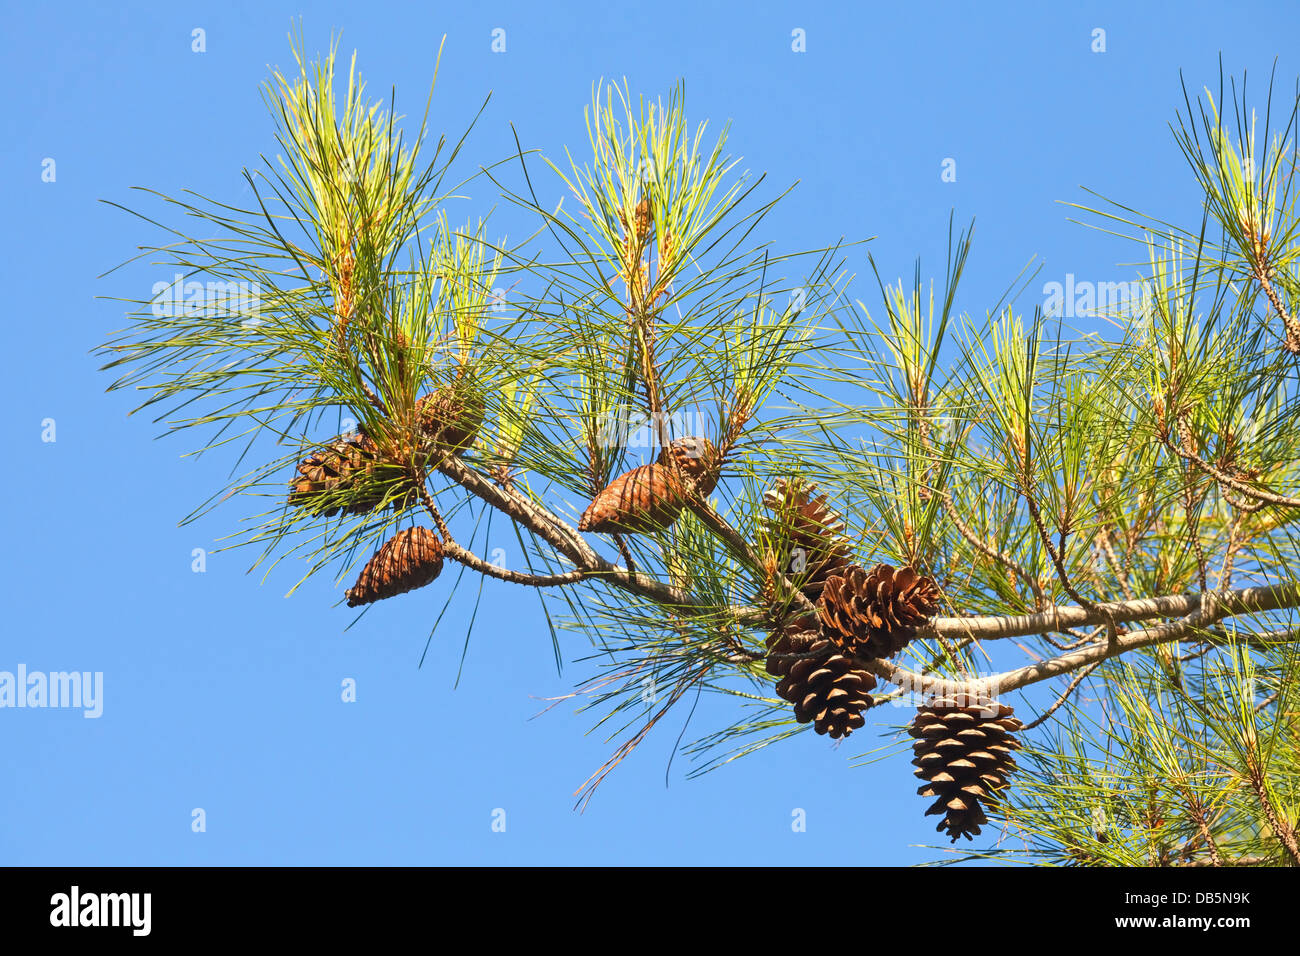 Branch of pine tree with cones above blue clear sky Stock Photo